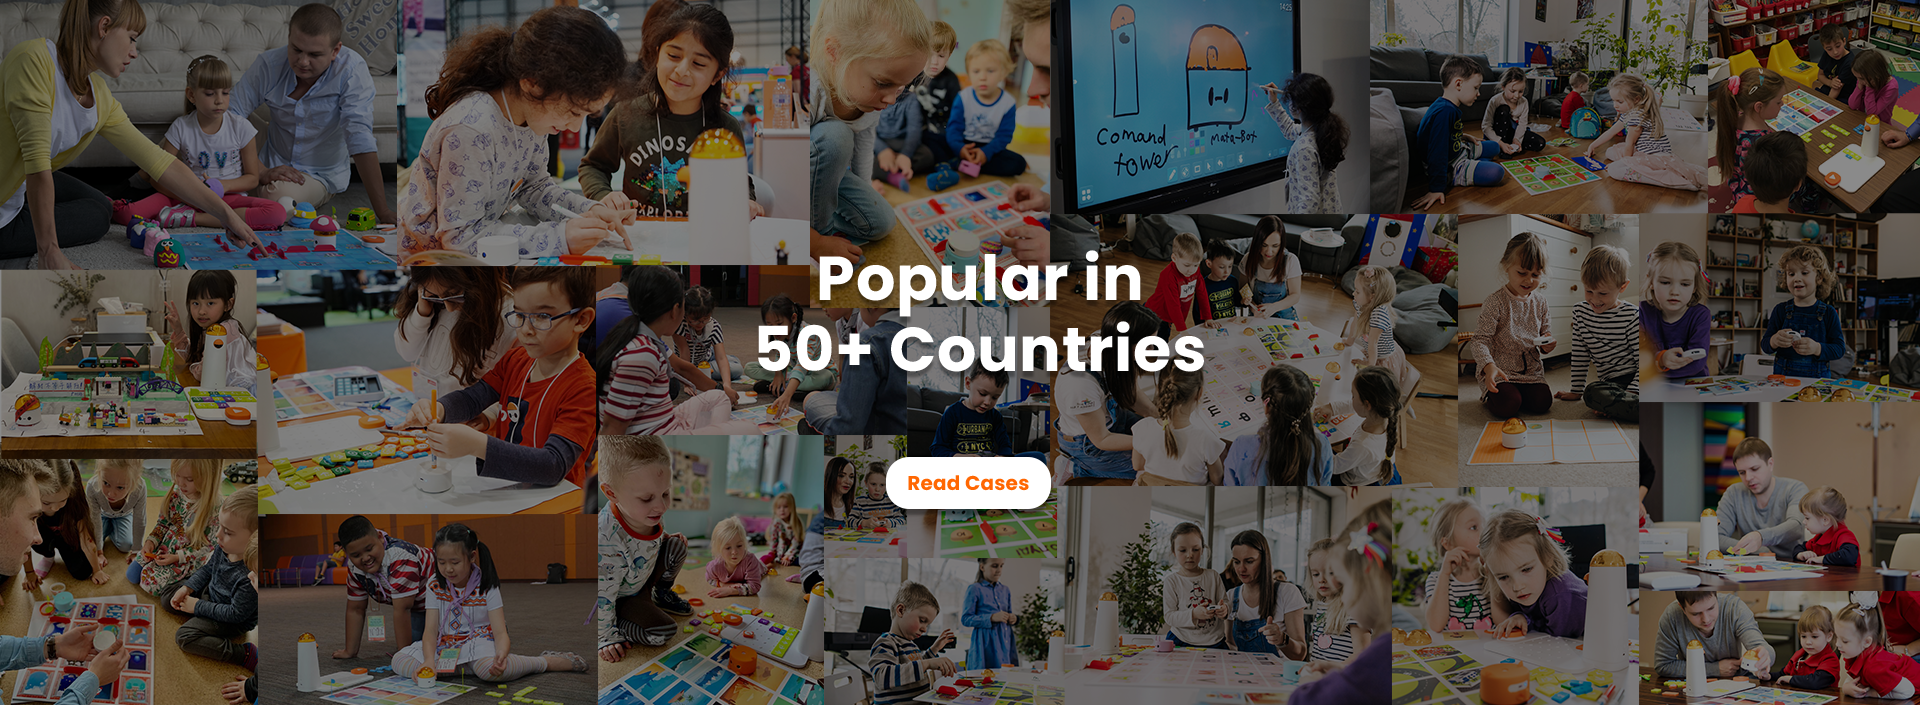 Matatalab Robots is Popular in 50+ Countries - Robotics for Kids - Matatalab